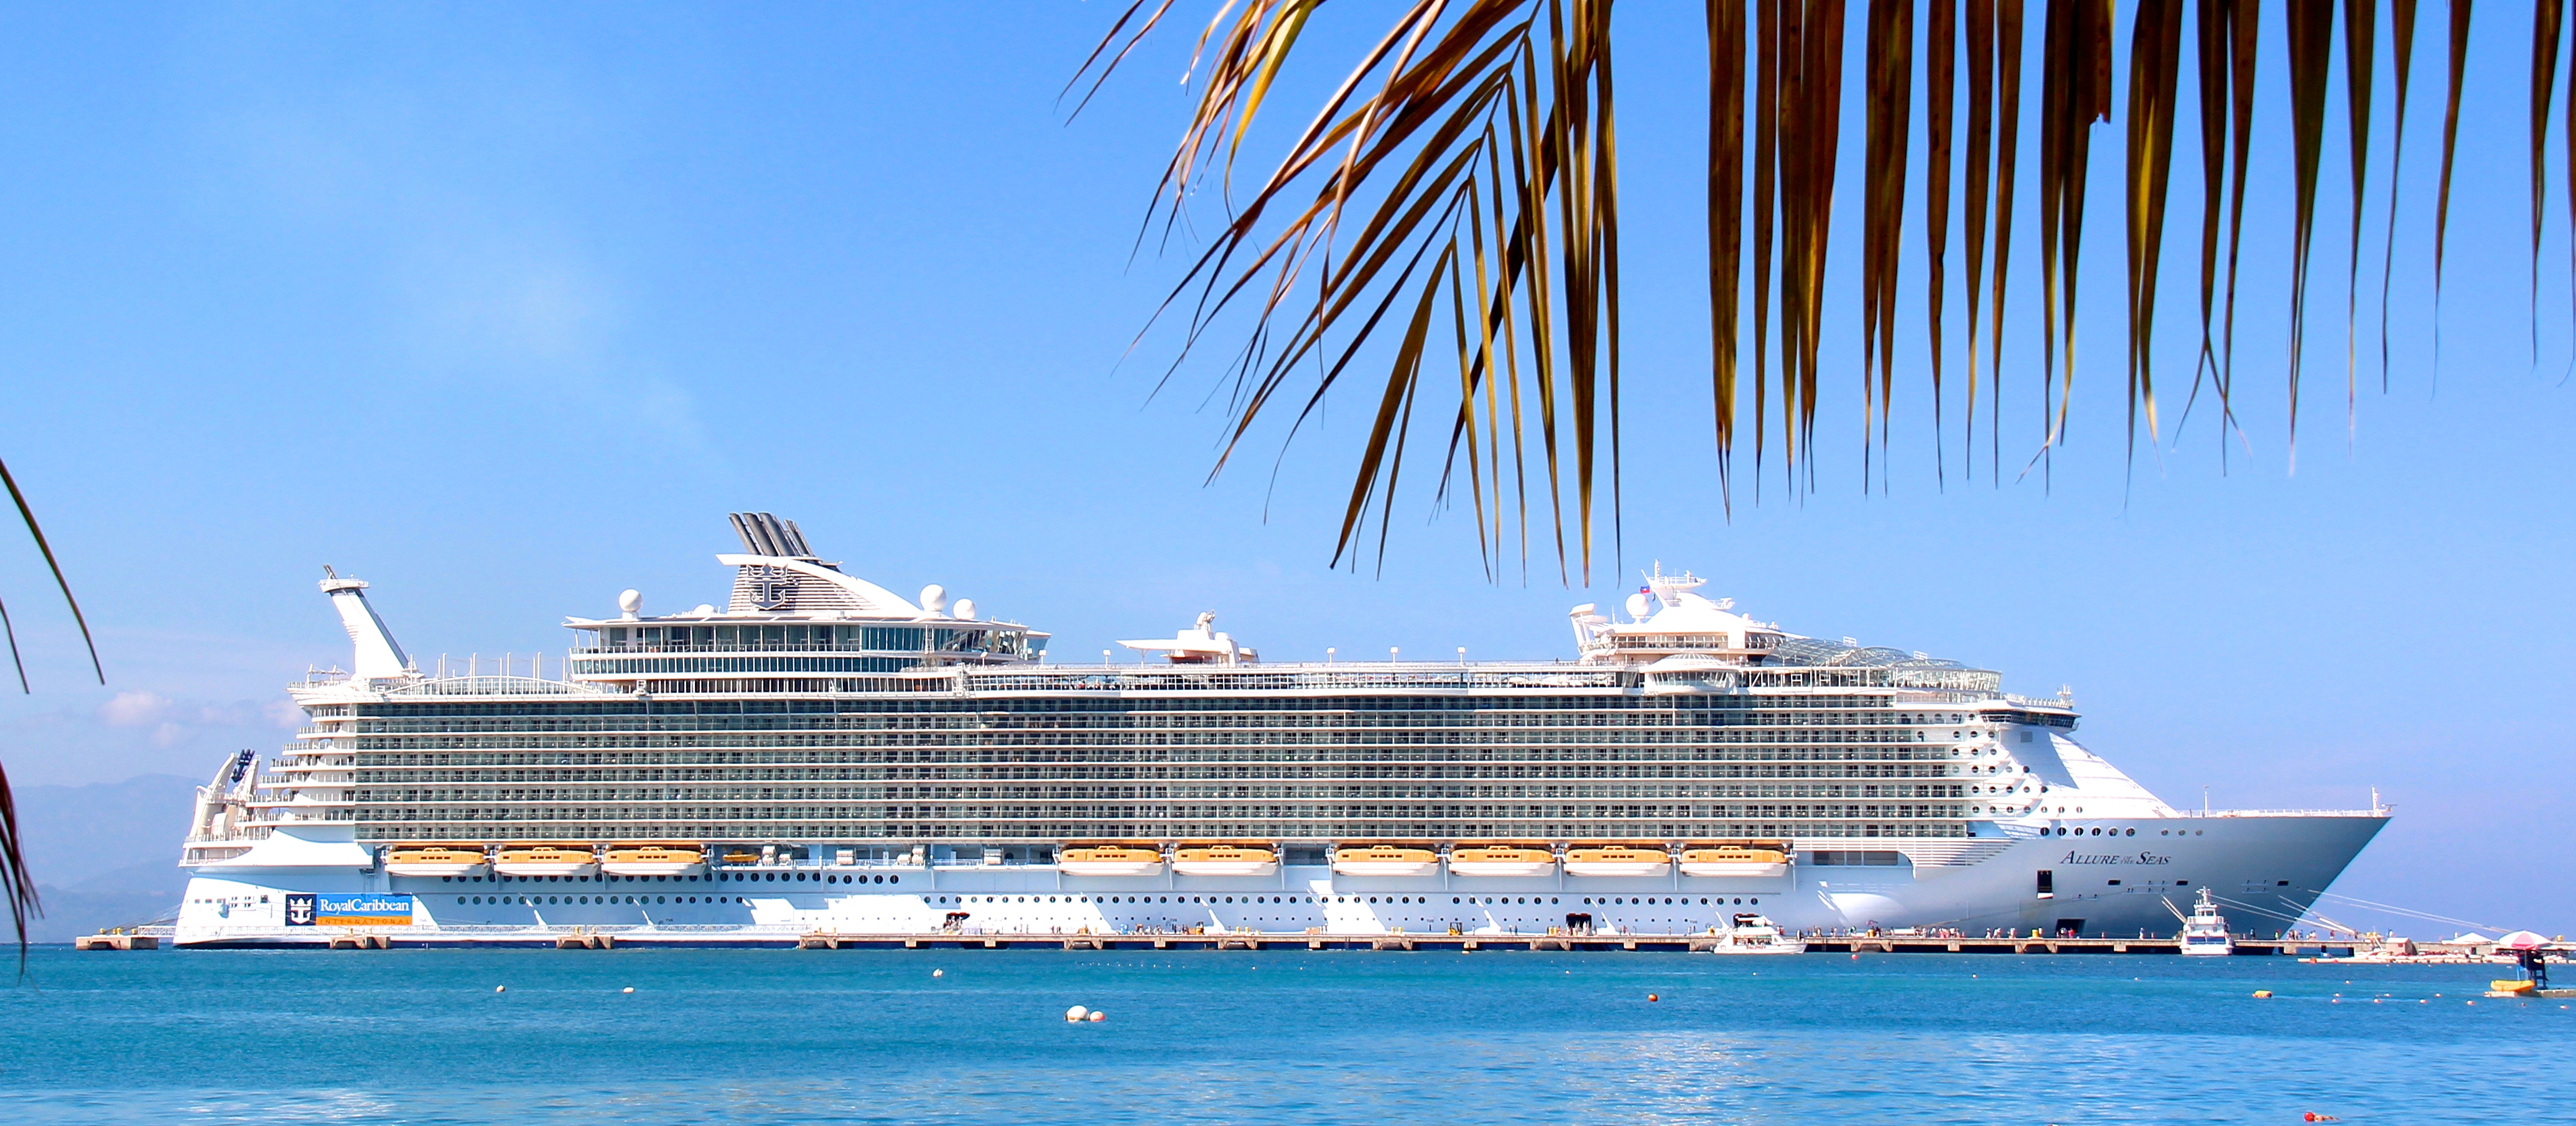 Size isn't all that matters - Allure of the Seas Cruise Review